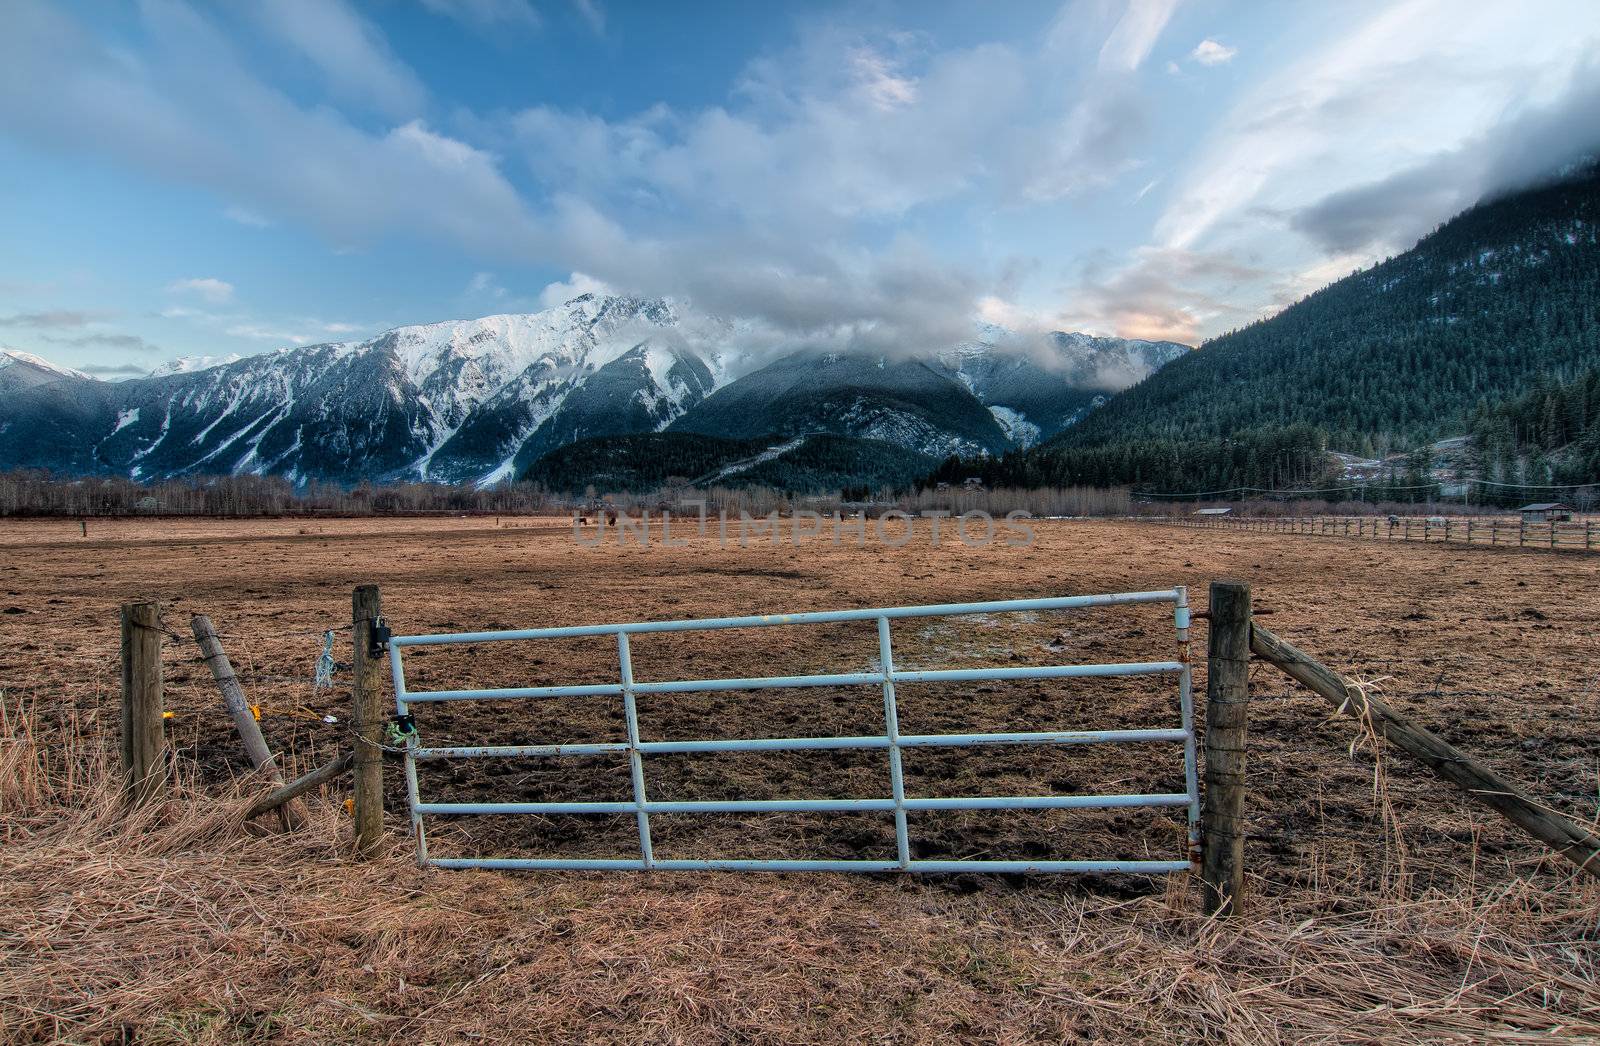 Fence gate for a farm pasture with snowy mountains in background